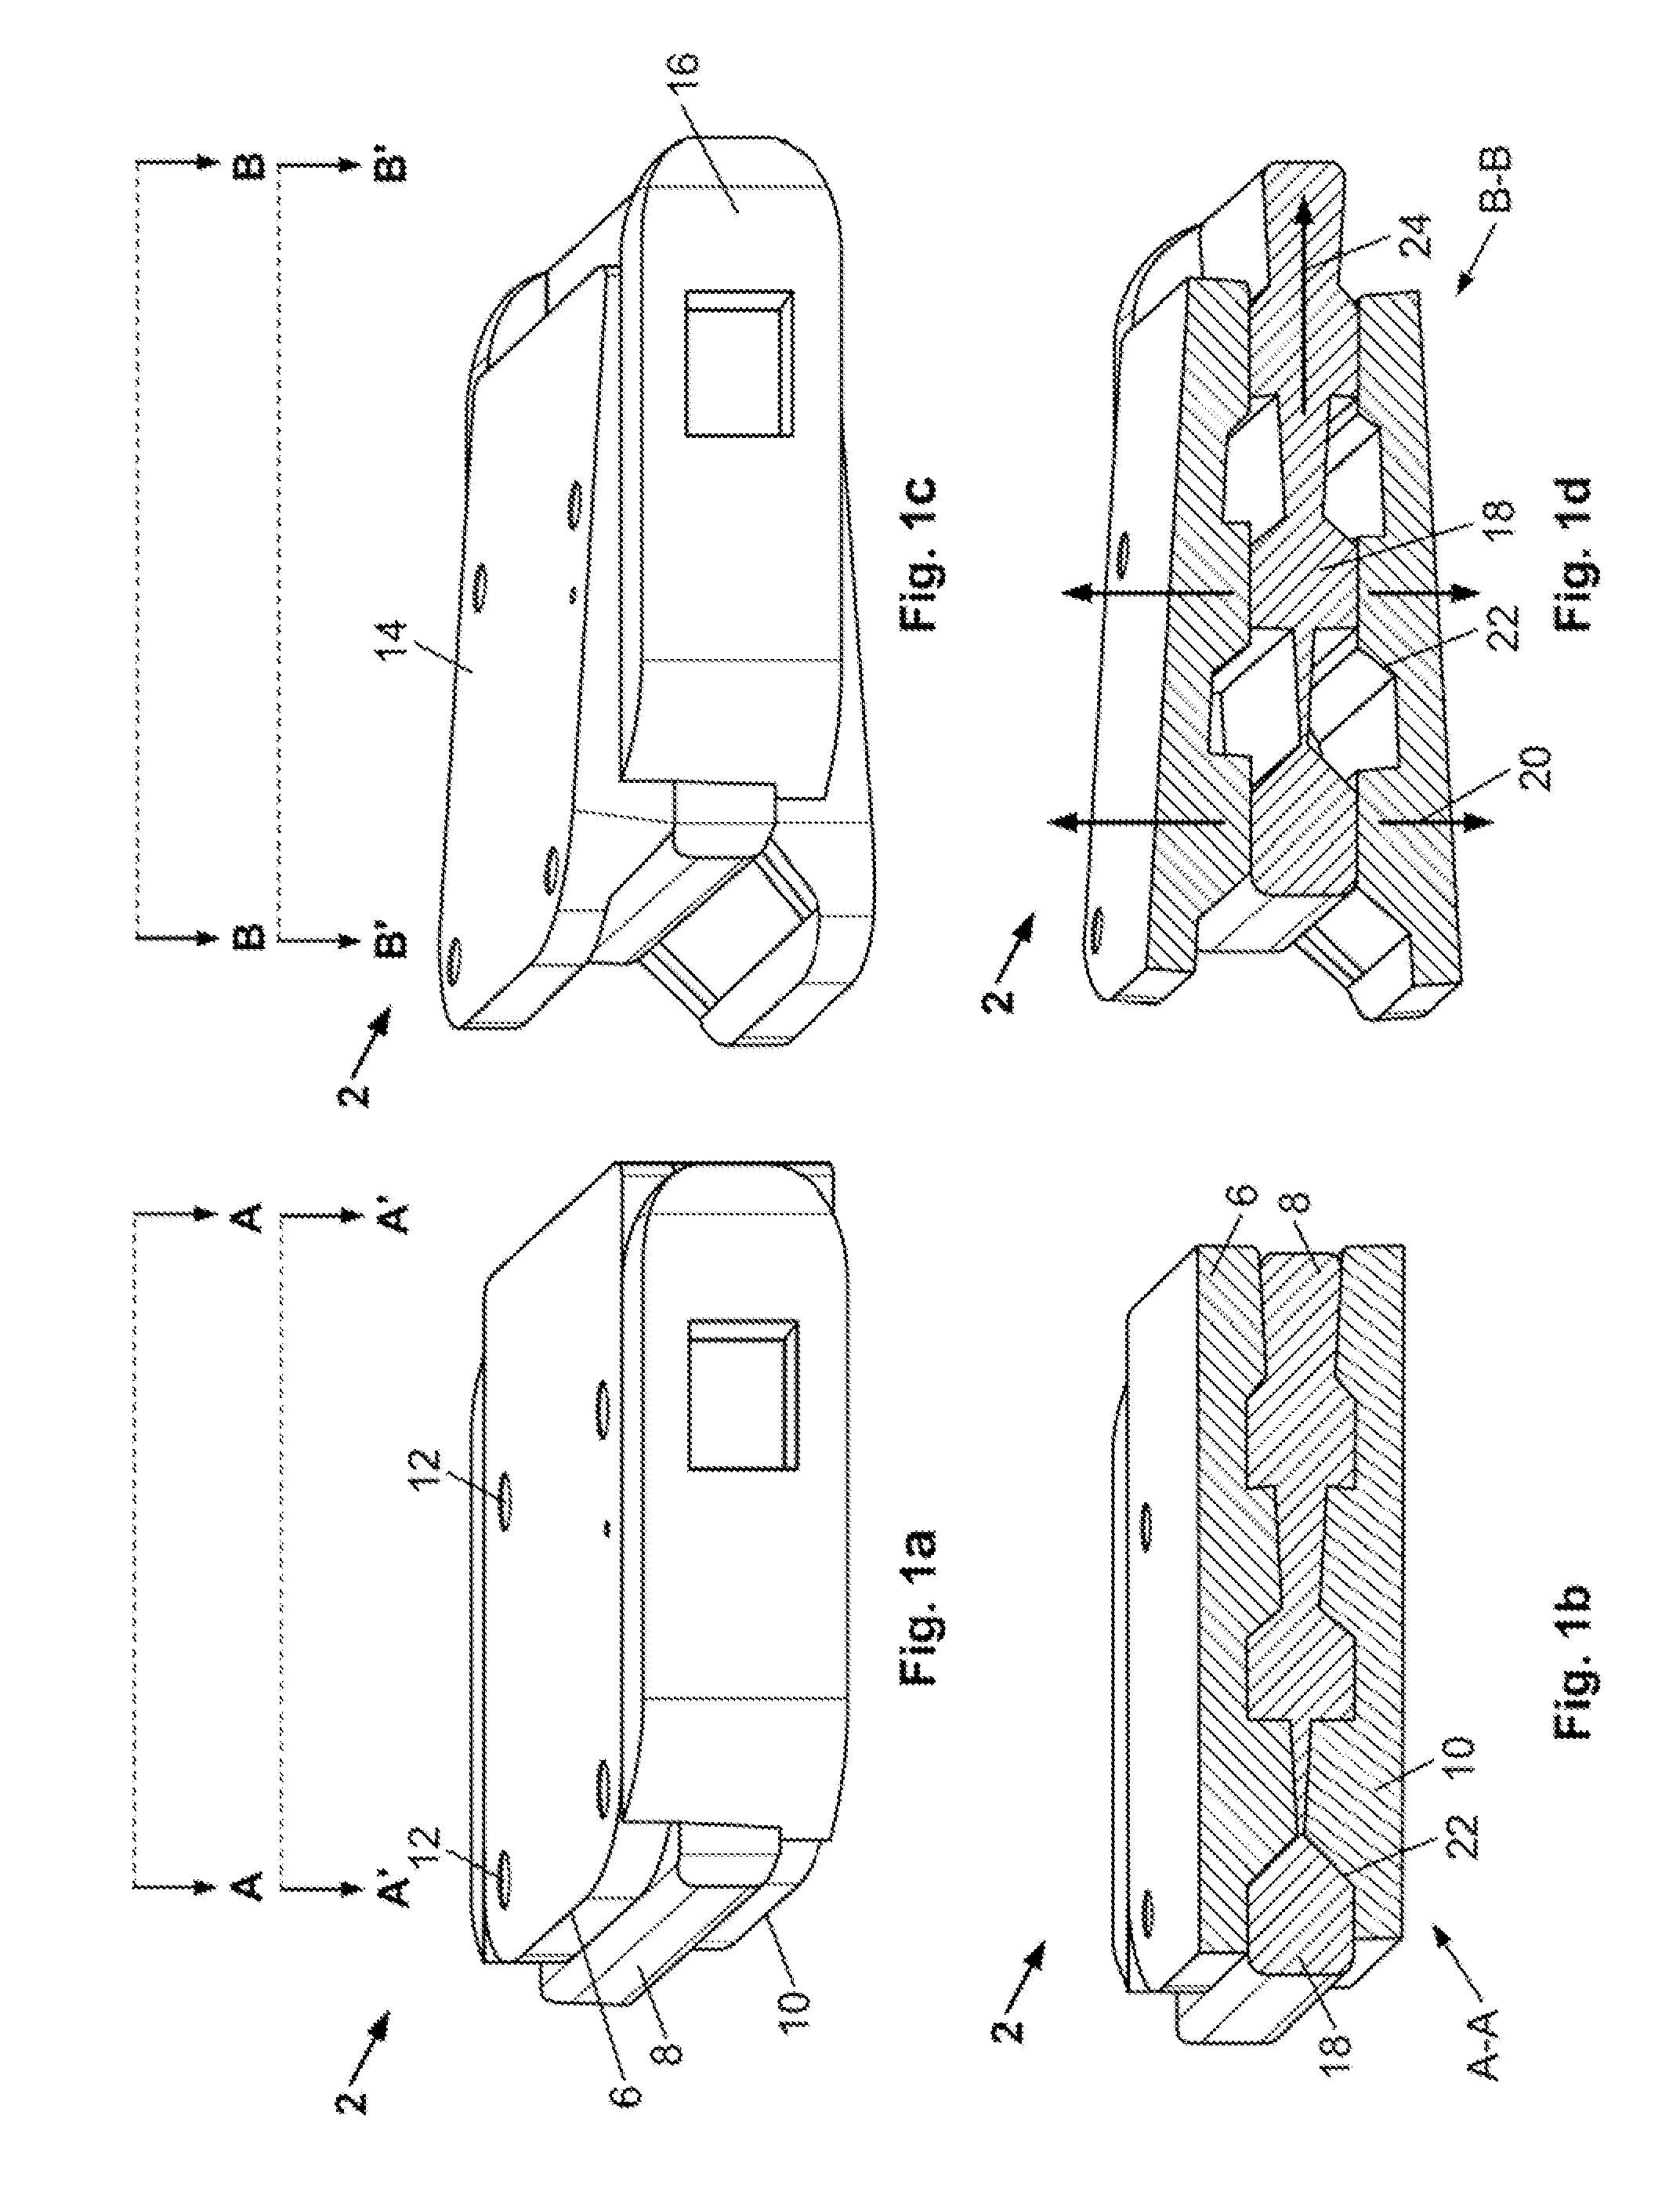 Fixation device and method